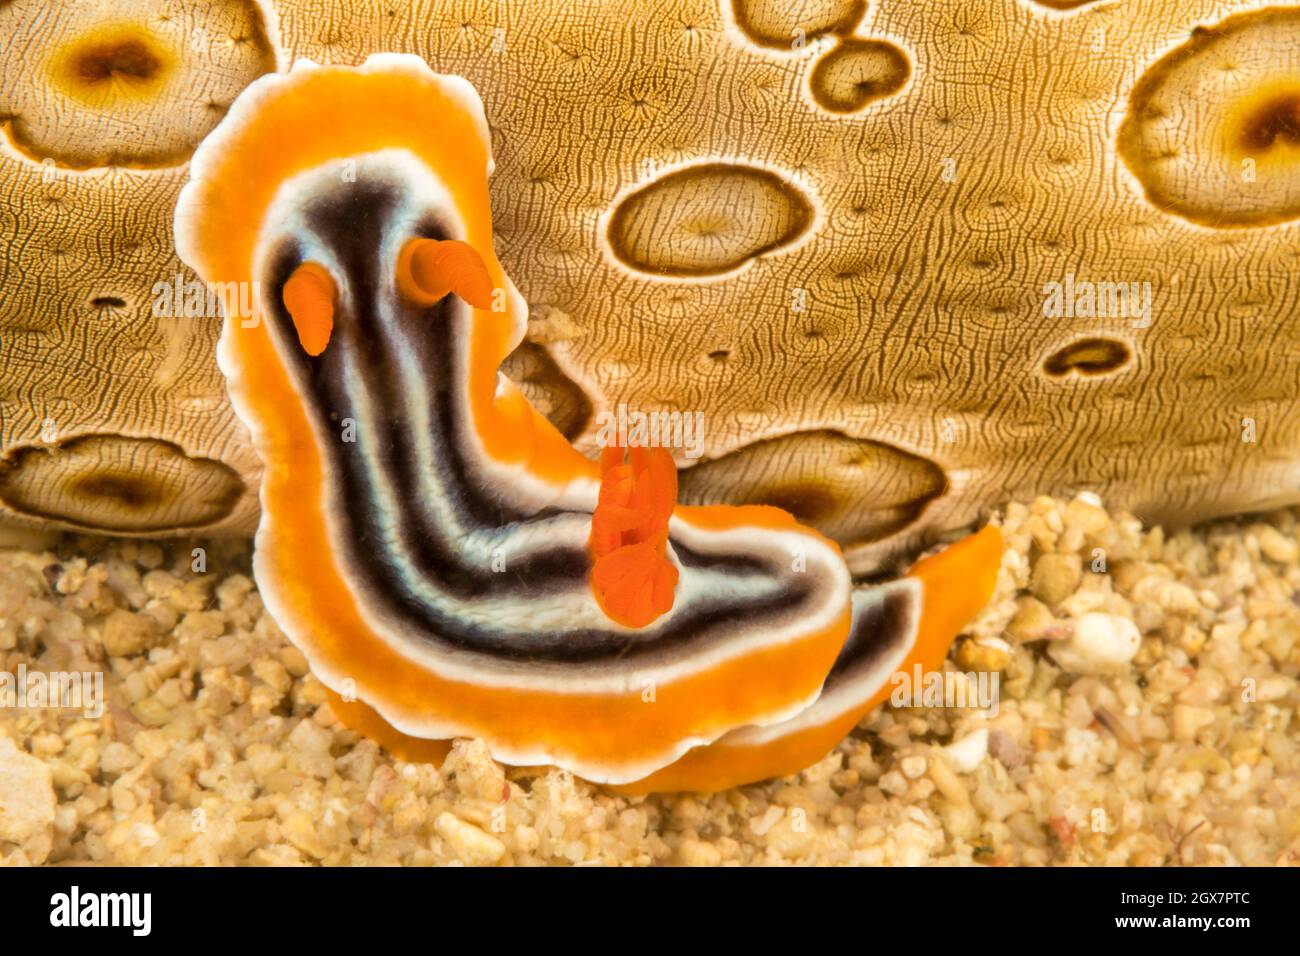 This pajama nudibranch, Chromodoris quadricolor, is rearing up in an attempt to climb up the side of a sea cucumber, Philippines. Stock Photo